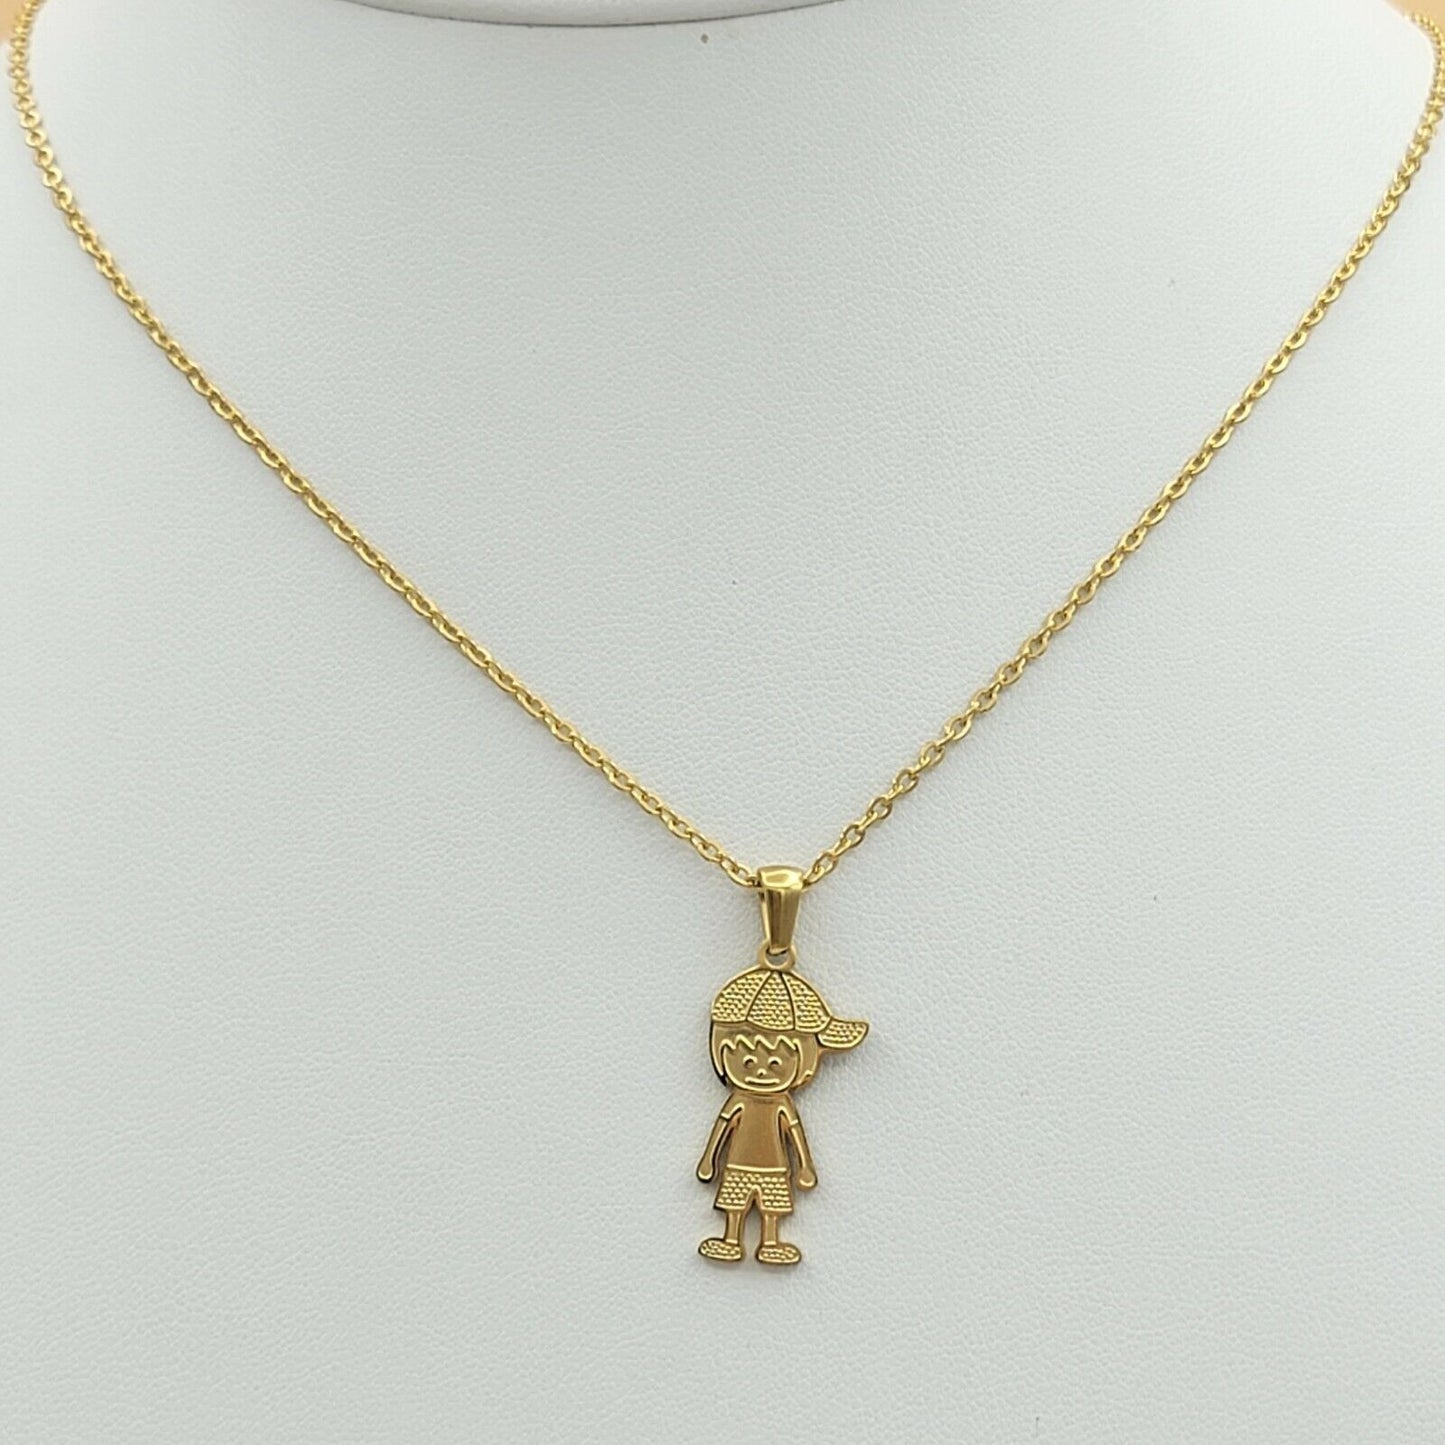 Necklaces - Stainless Steel Gold Plated. My Little Boy Pendant & Chain. Family